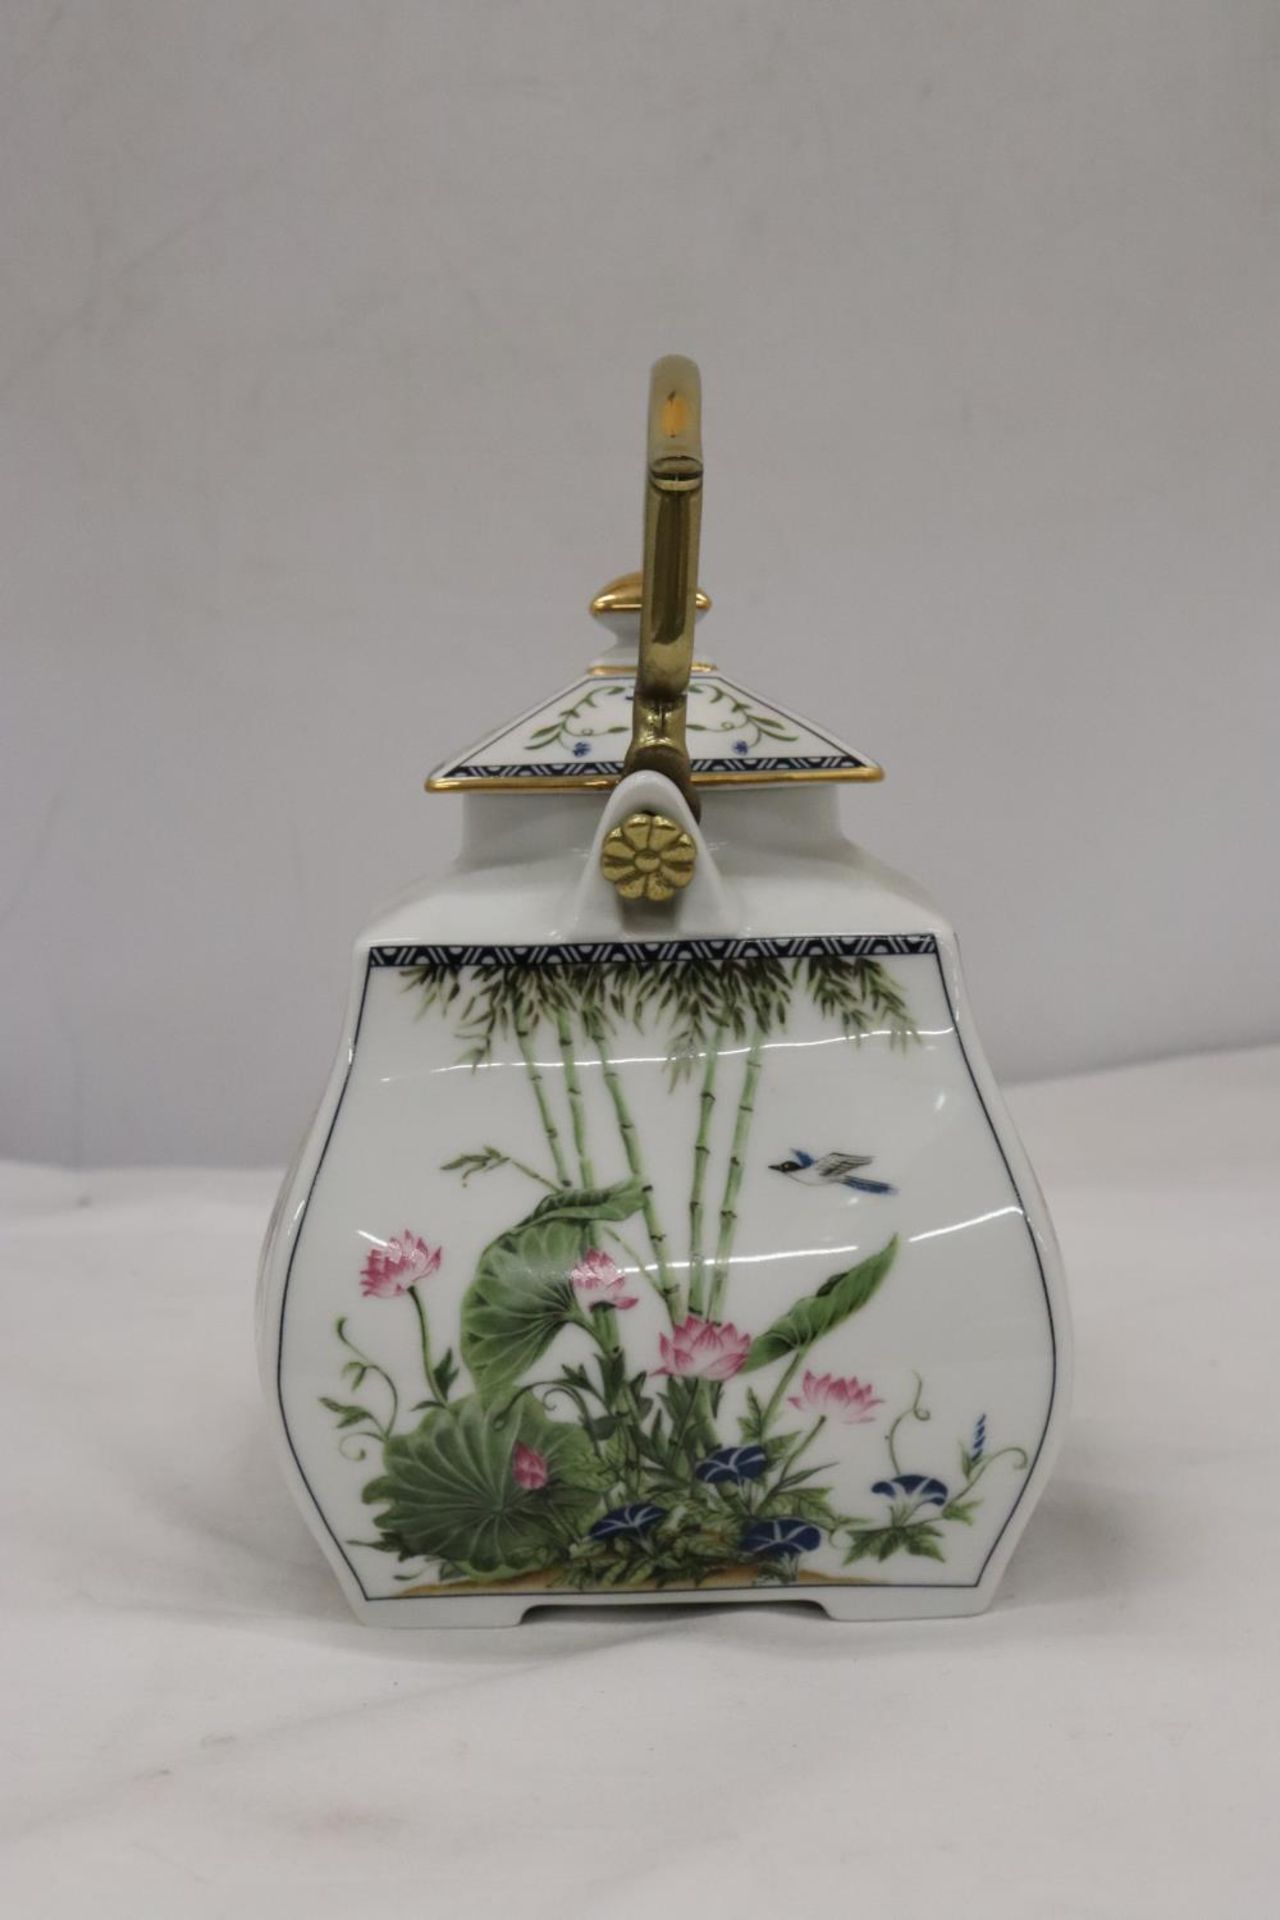 A FRANKLIN PORCELAIN 'THE BIRDS AND FLOWERS OF THE ORIENT' TEAPOT BY NAOKO NOBATA WITH 22CT GOLD - Image 4 of 7